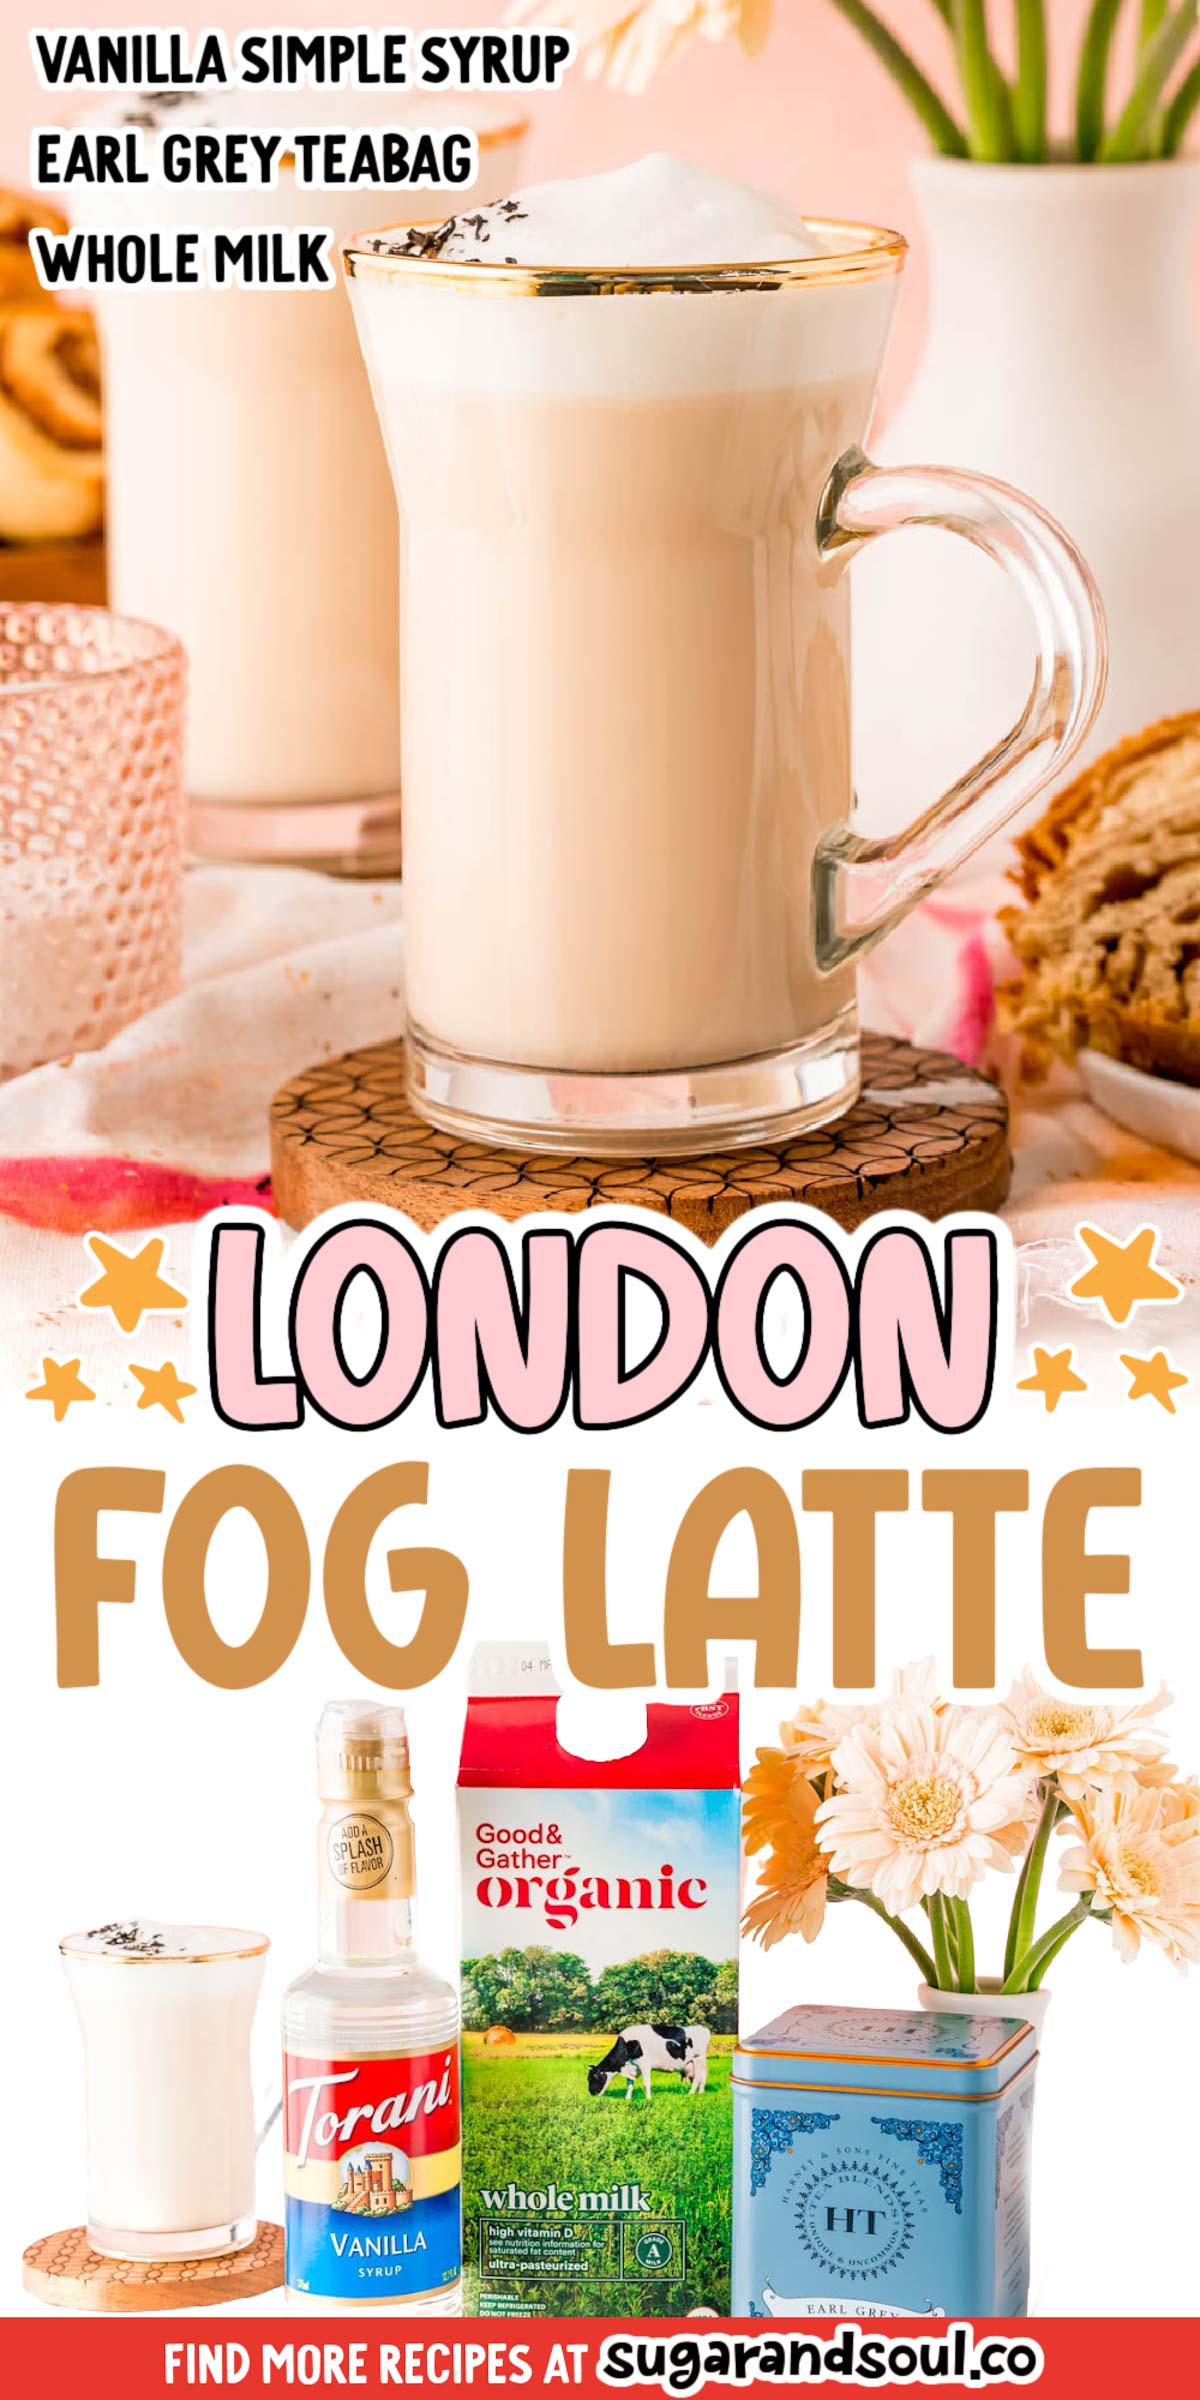 This London Fog Latte is the perfect Starbucks copycat that's made right at home with only 4-ingredients, making it super budget-friendly! via @sugarandsoulco